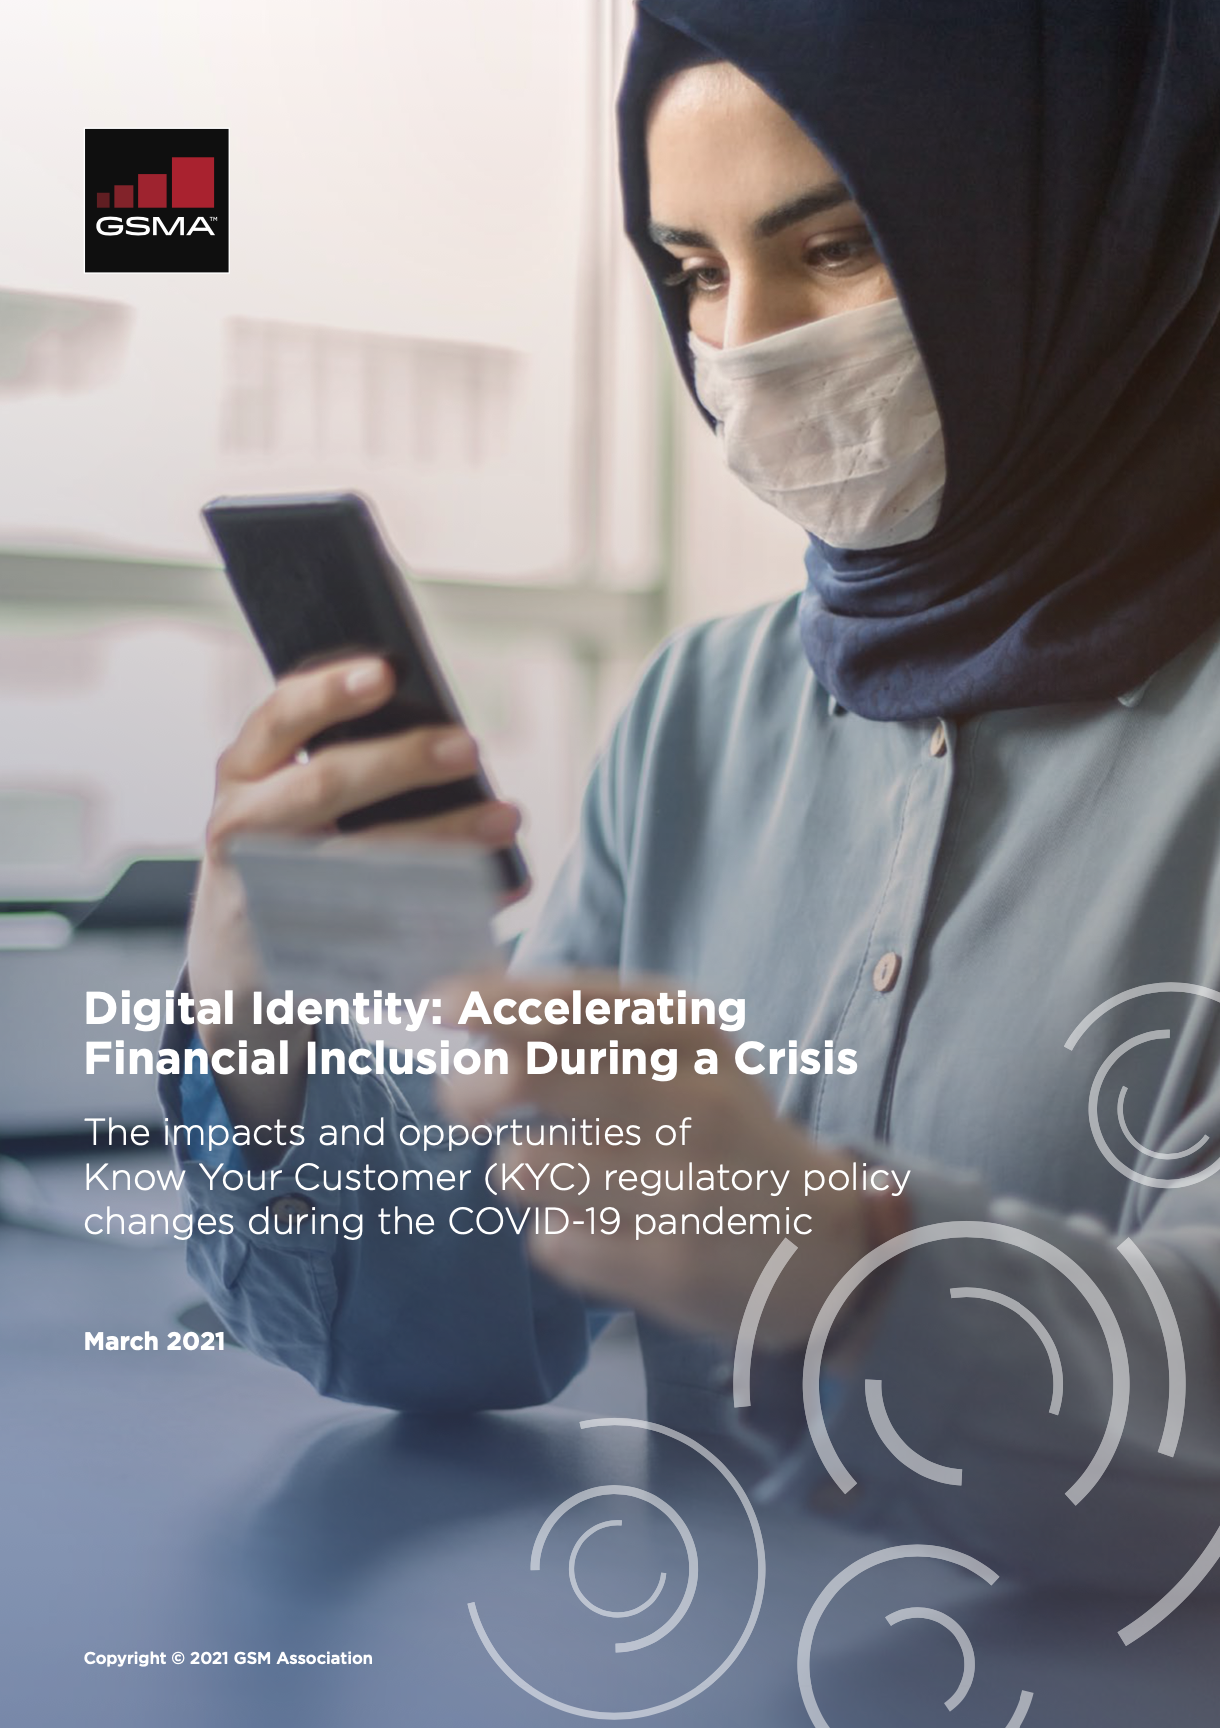 Digital Identity: Accelerating Financial Inclusion During a Crisis